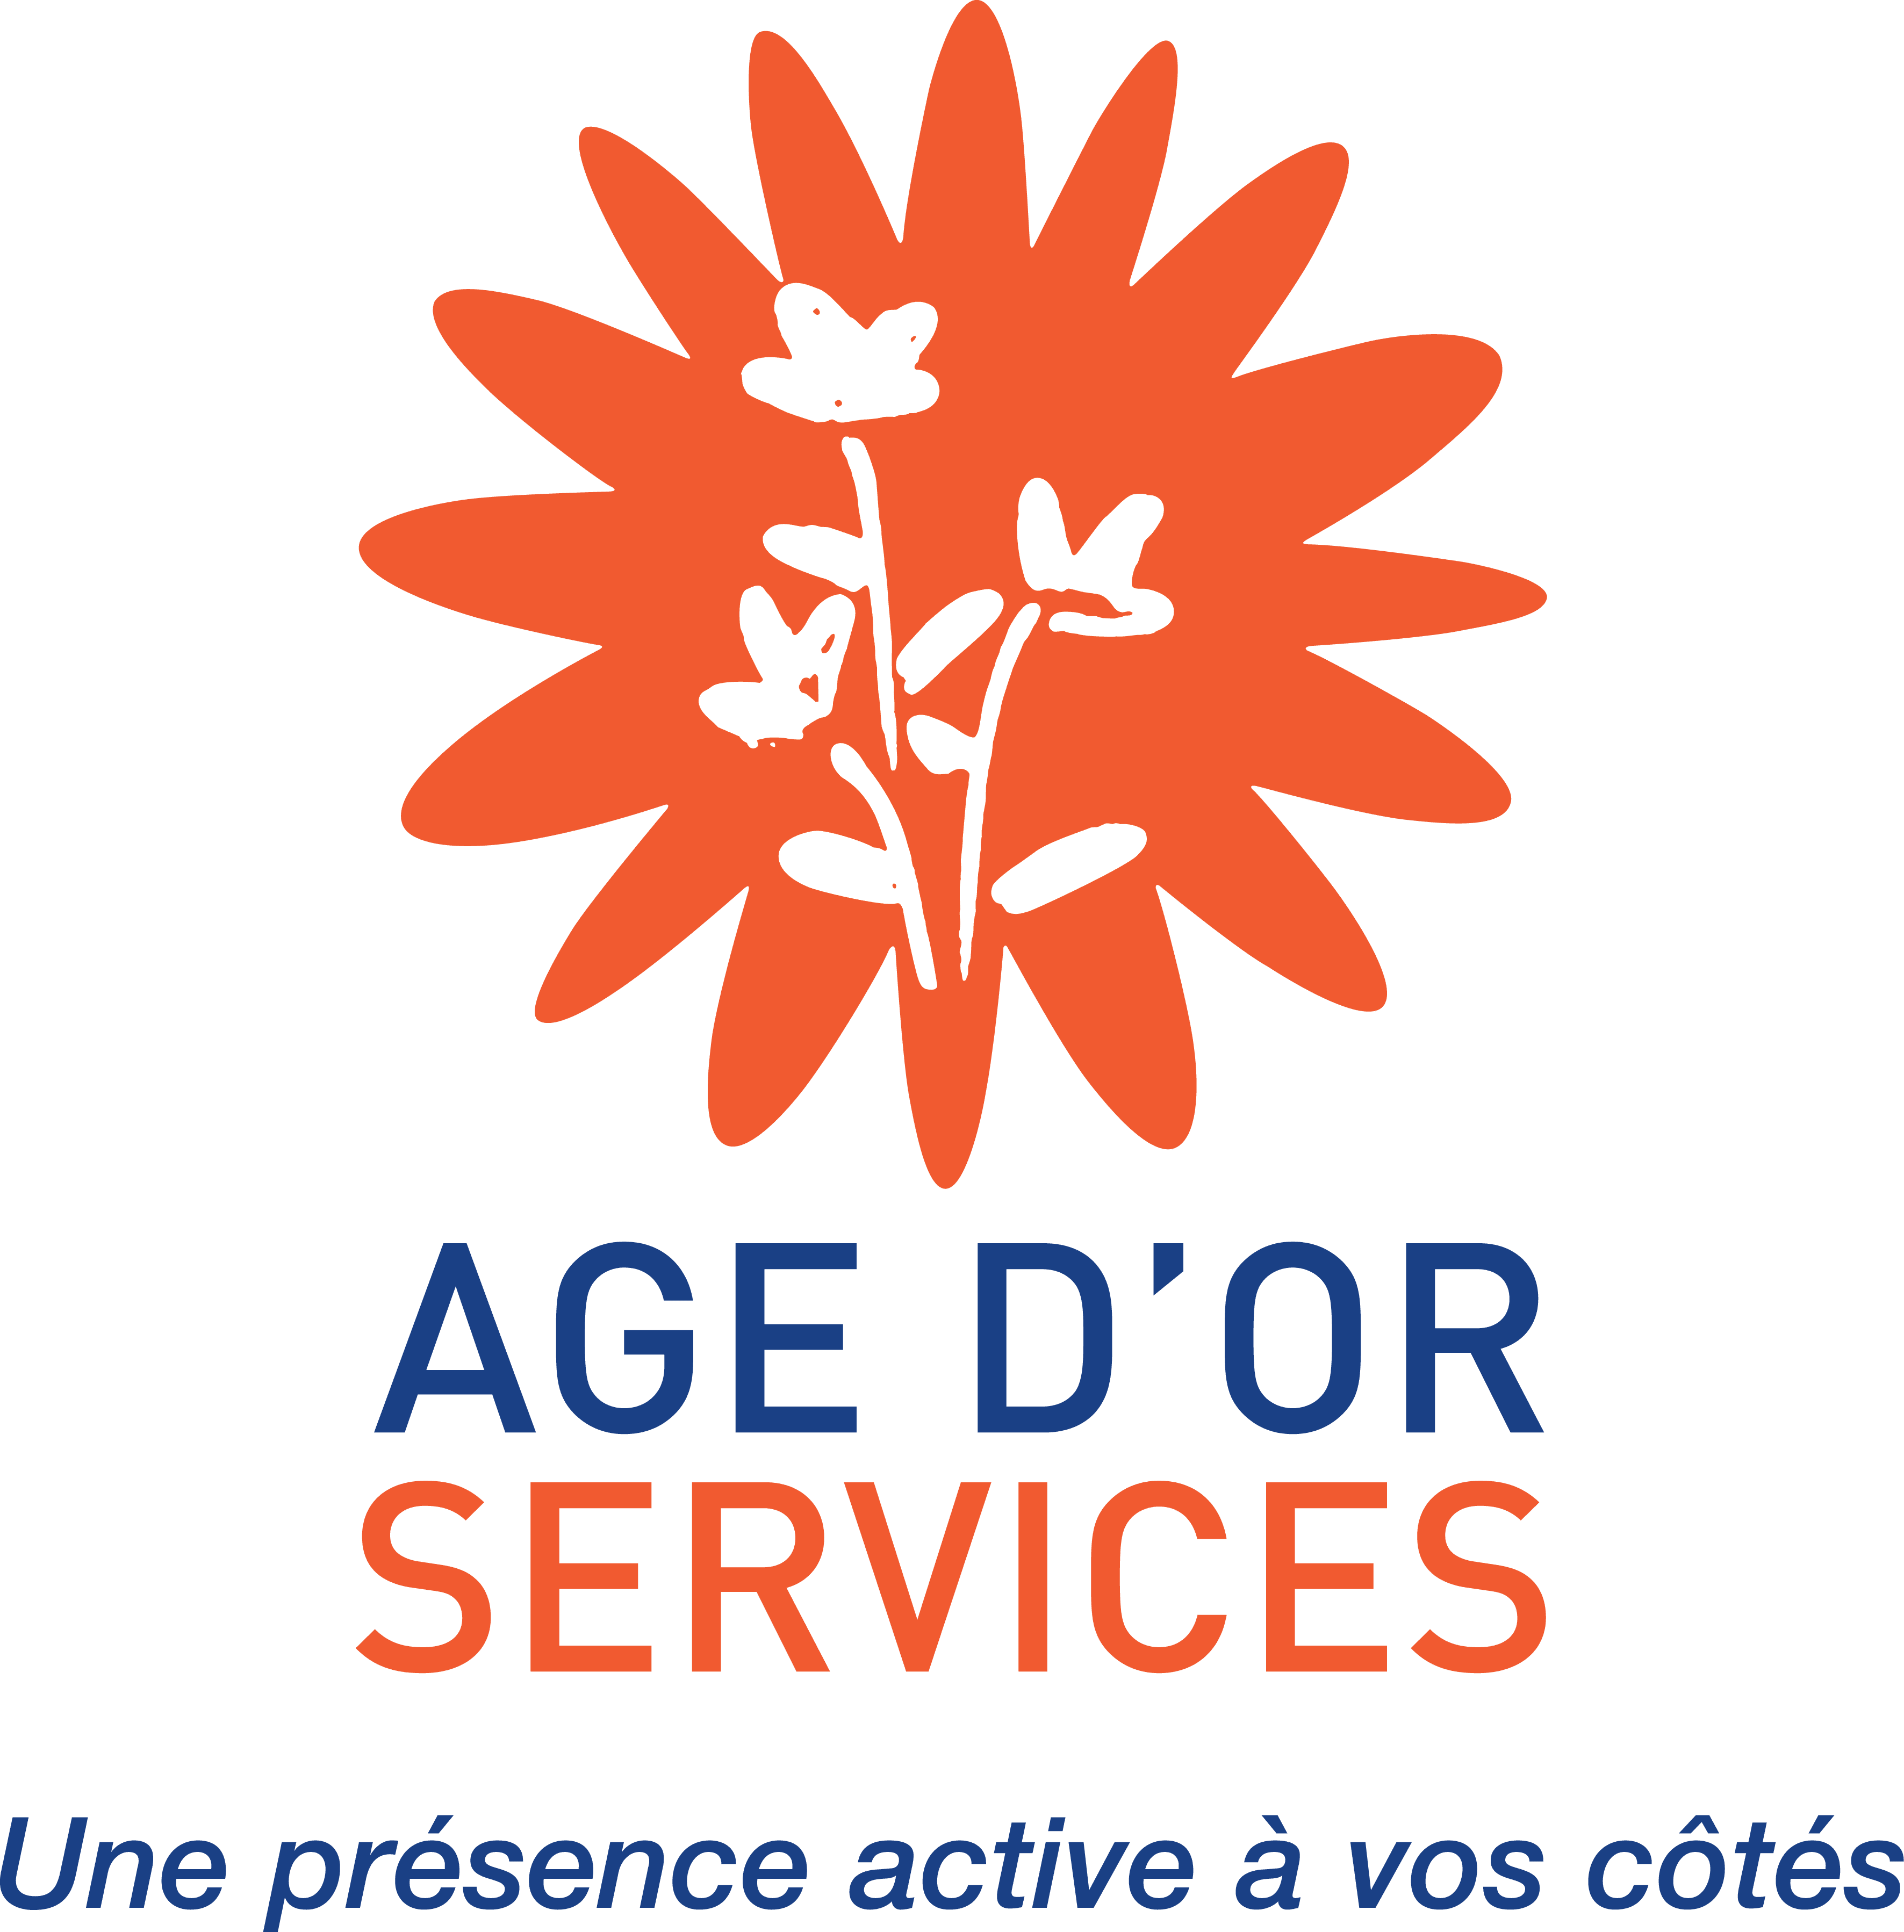 Age d'or services logo